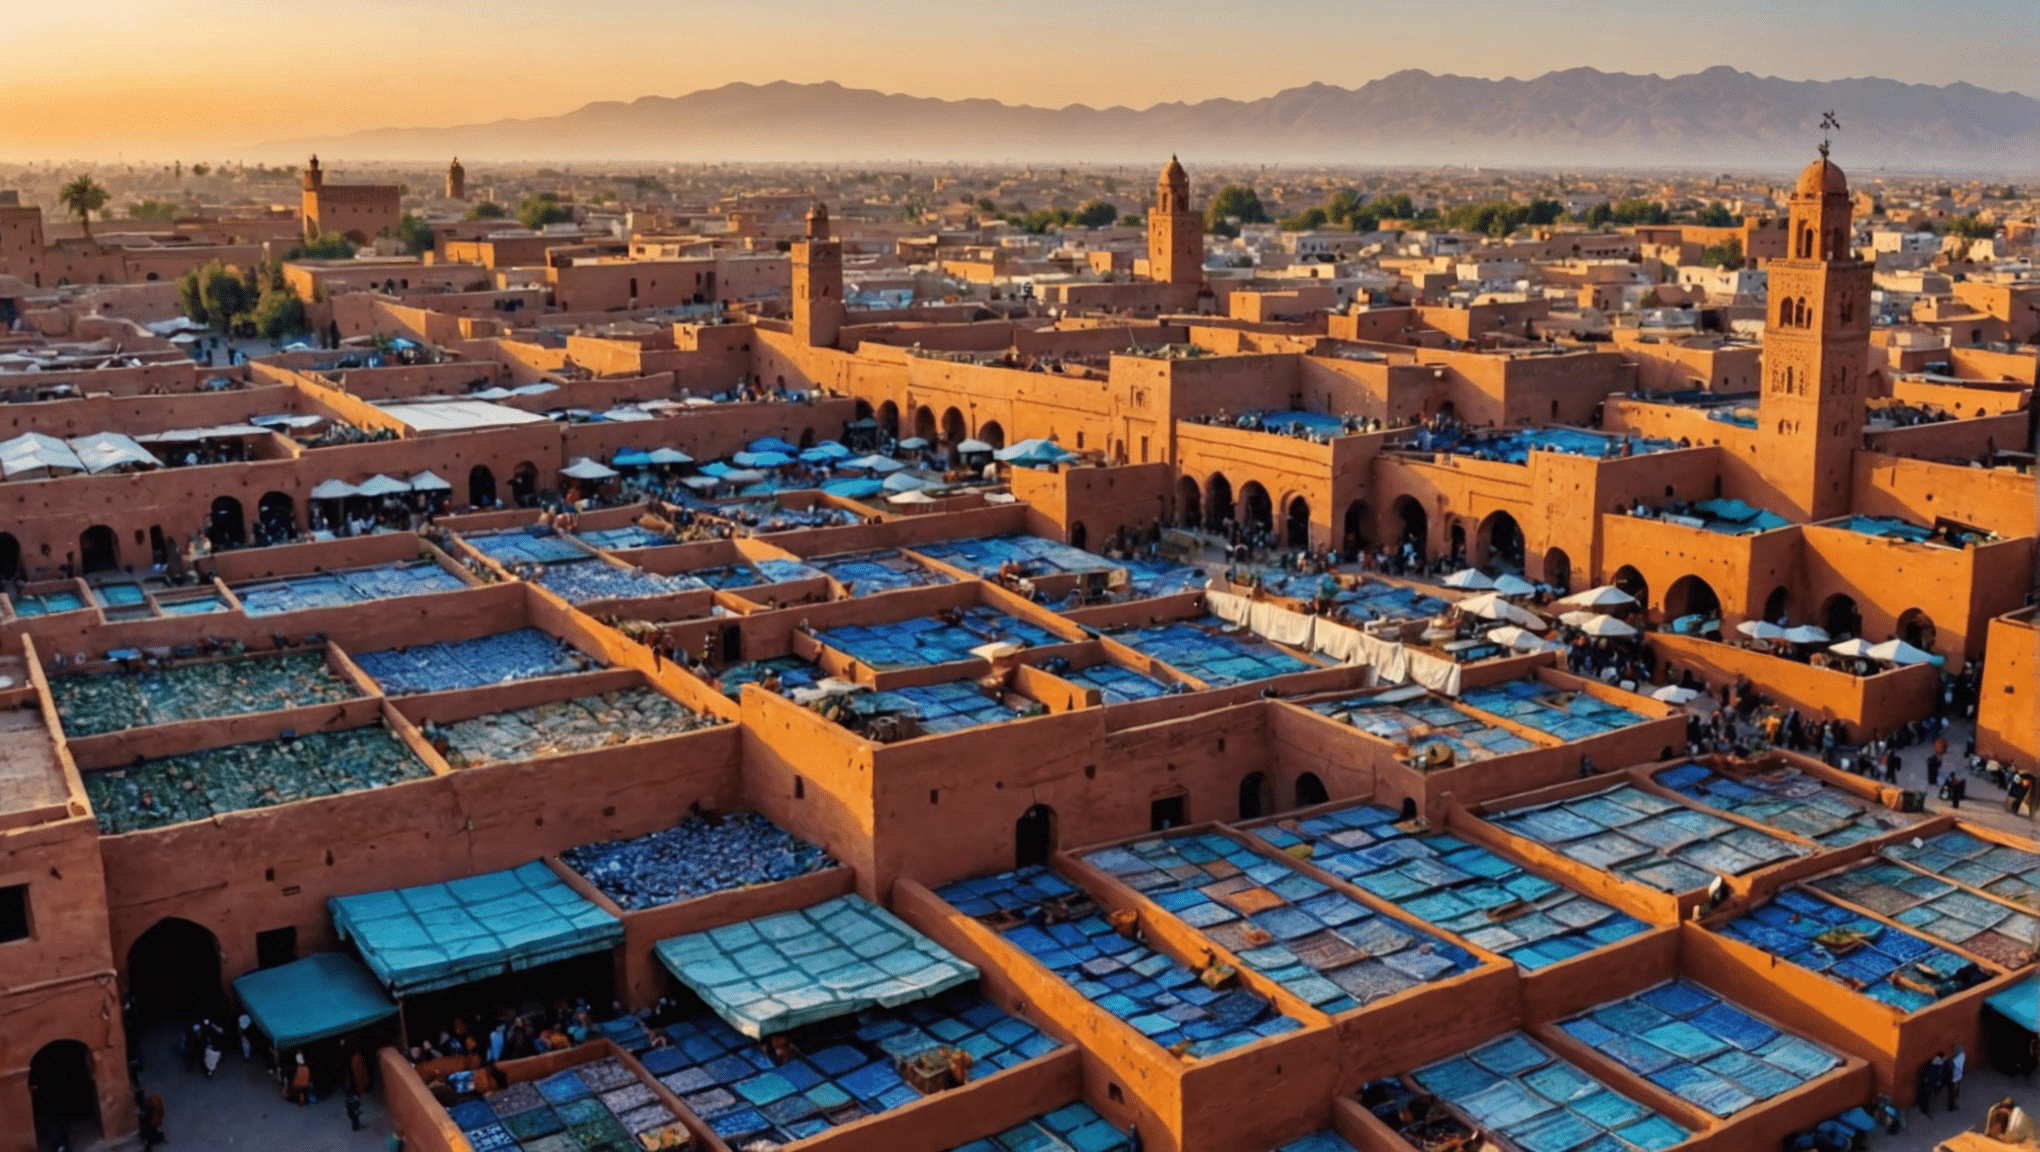 discover the top 10 must-do activities in marrakech as recommended by a local expert, and make the most of your visit to this vibrant city.